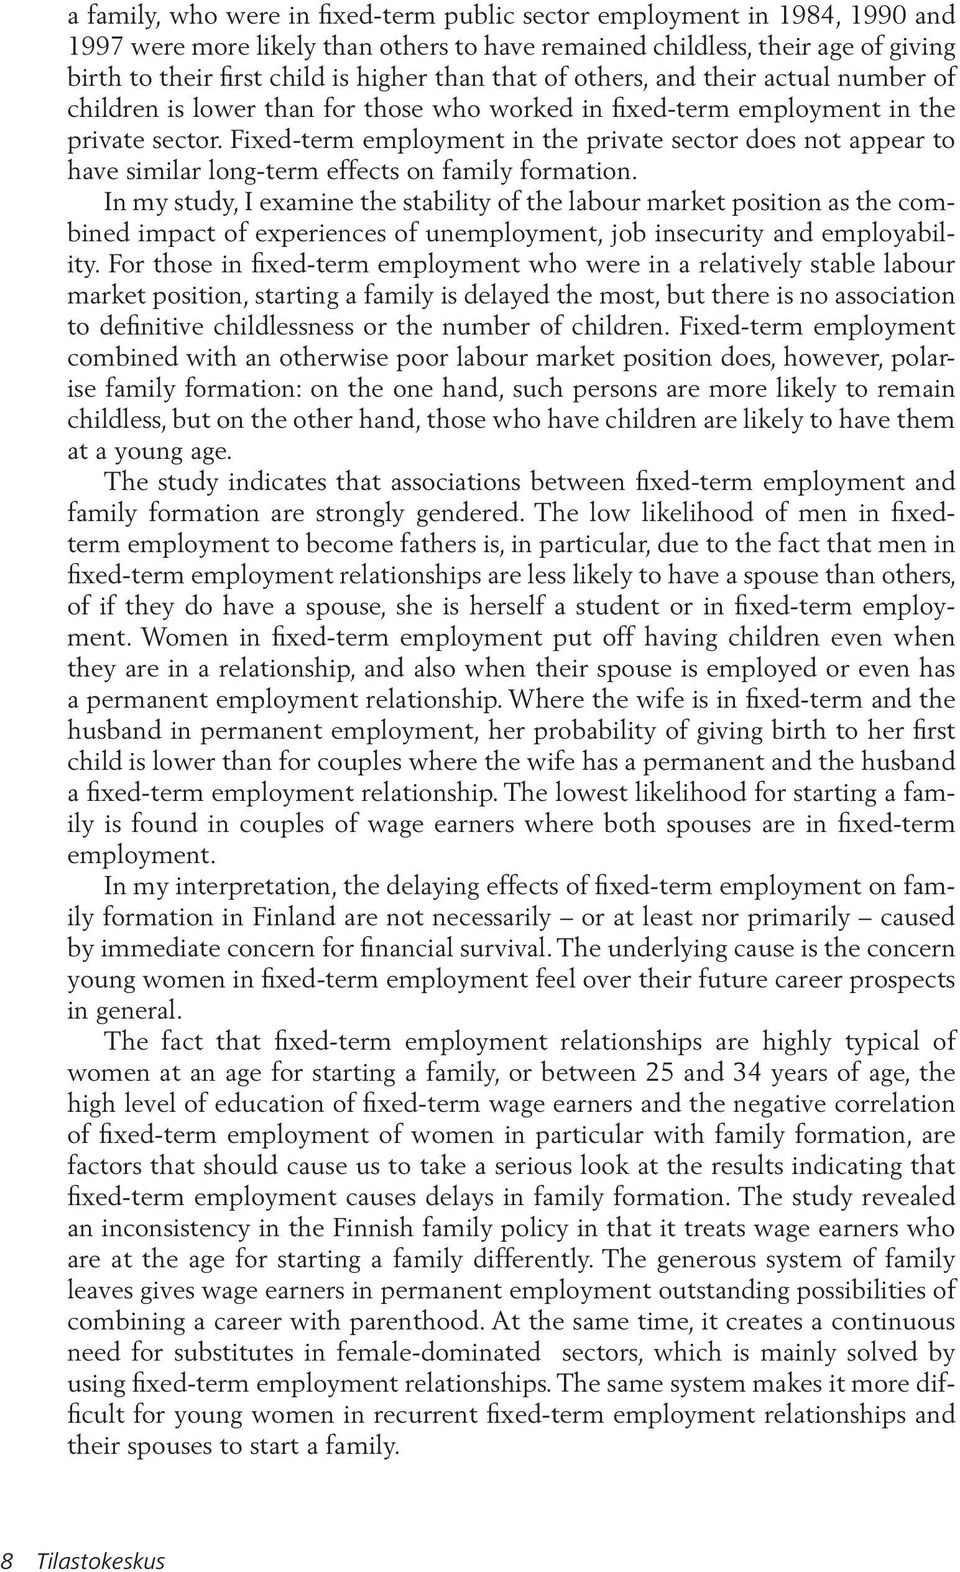 Fixed-term employment in the private sector does not appear to have similar long-term effects on family formation.